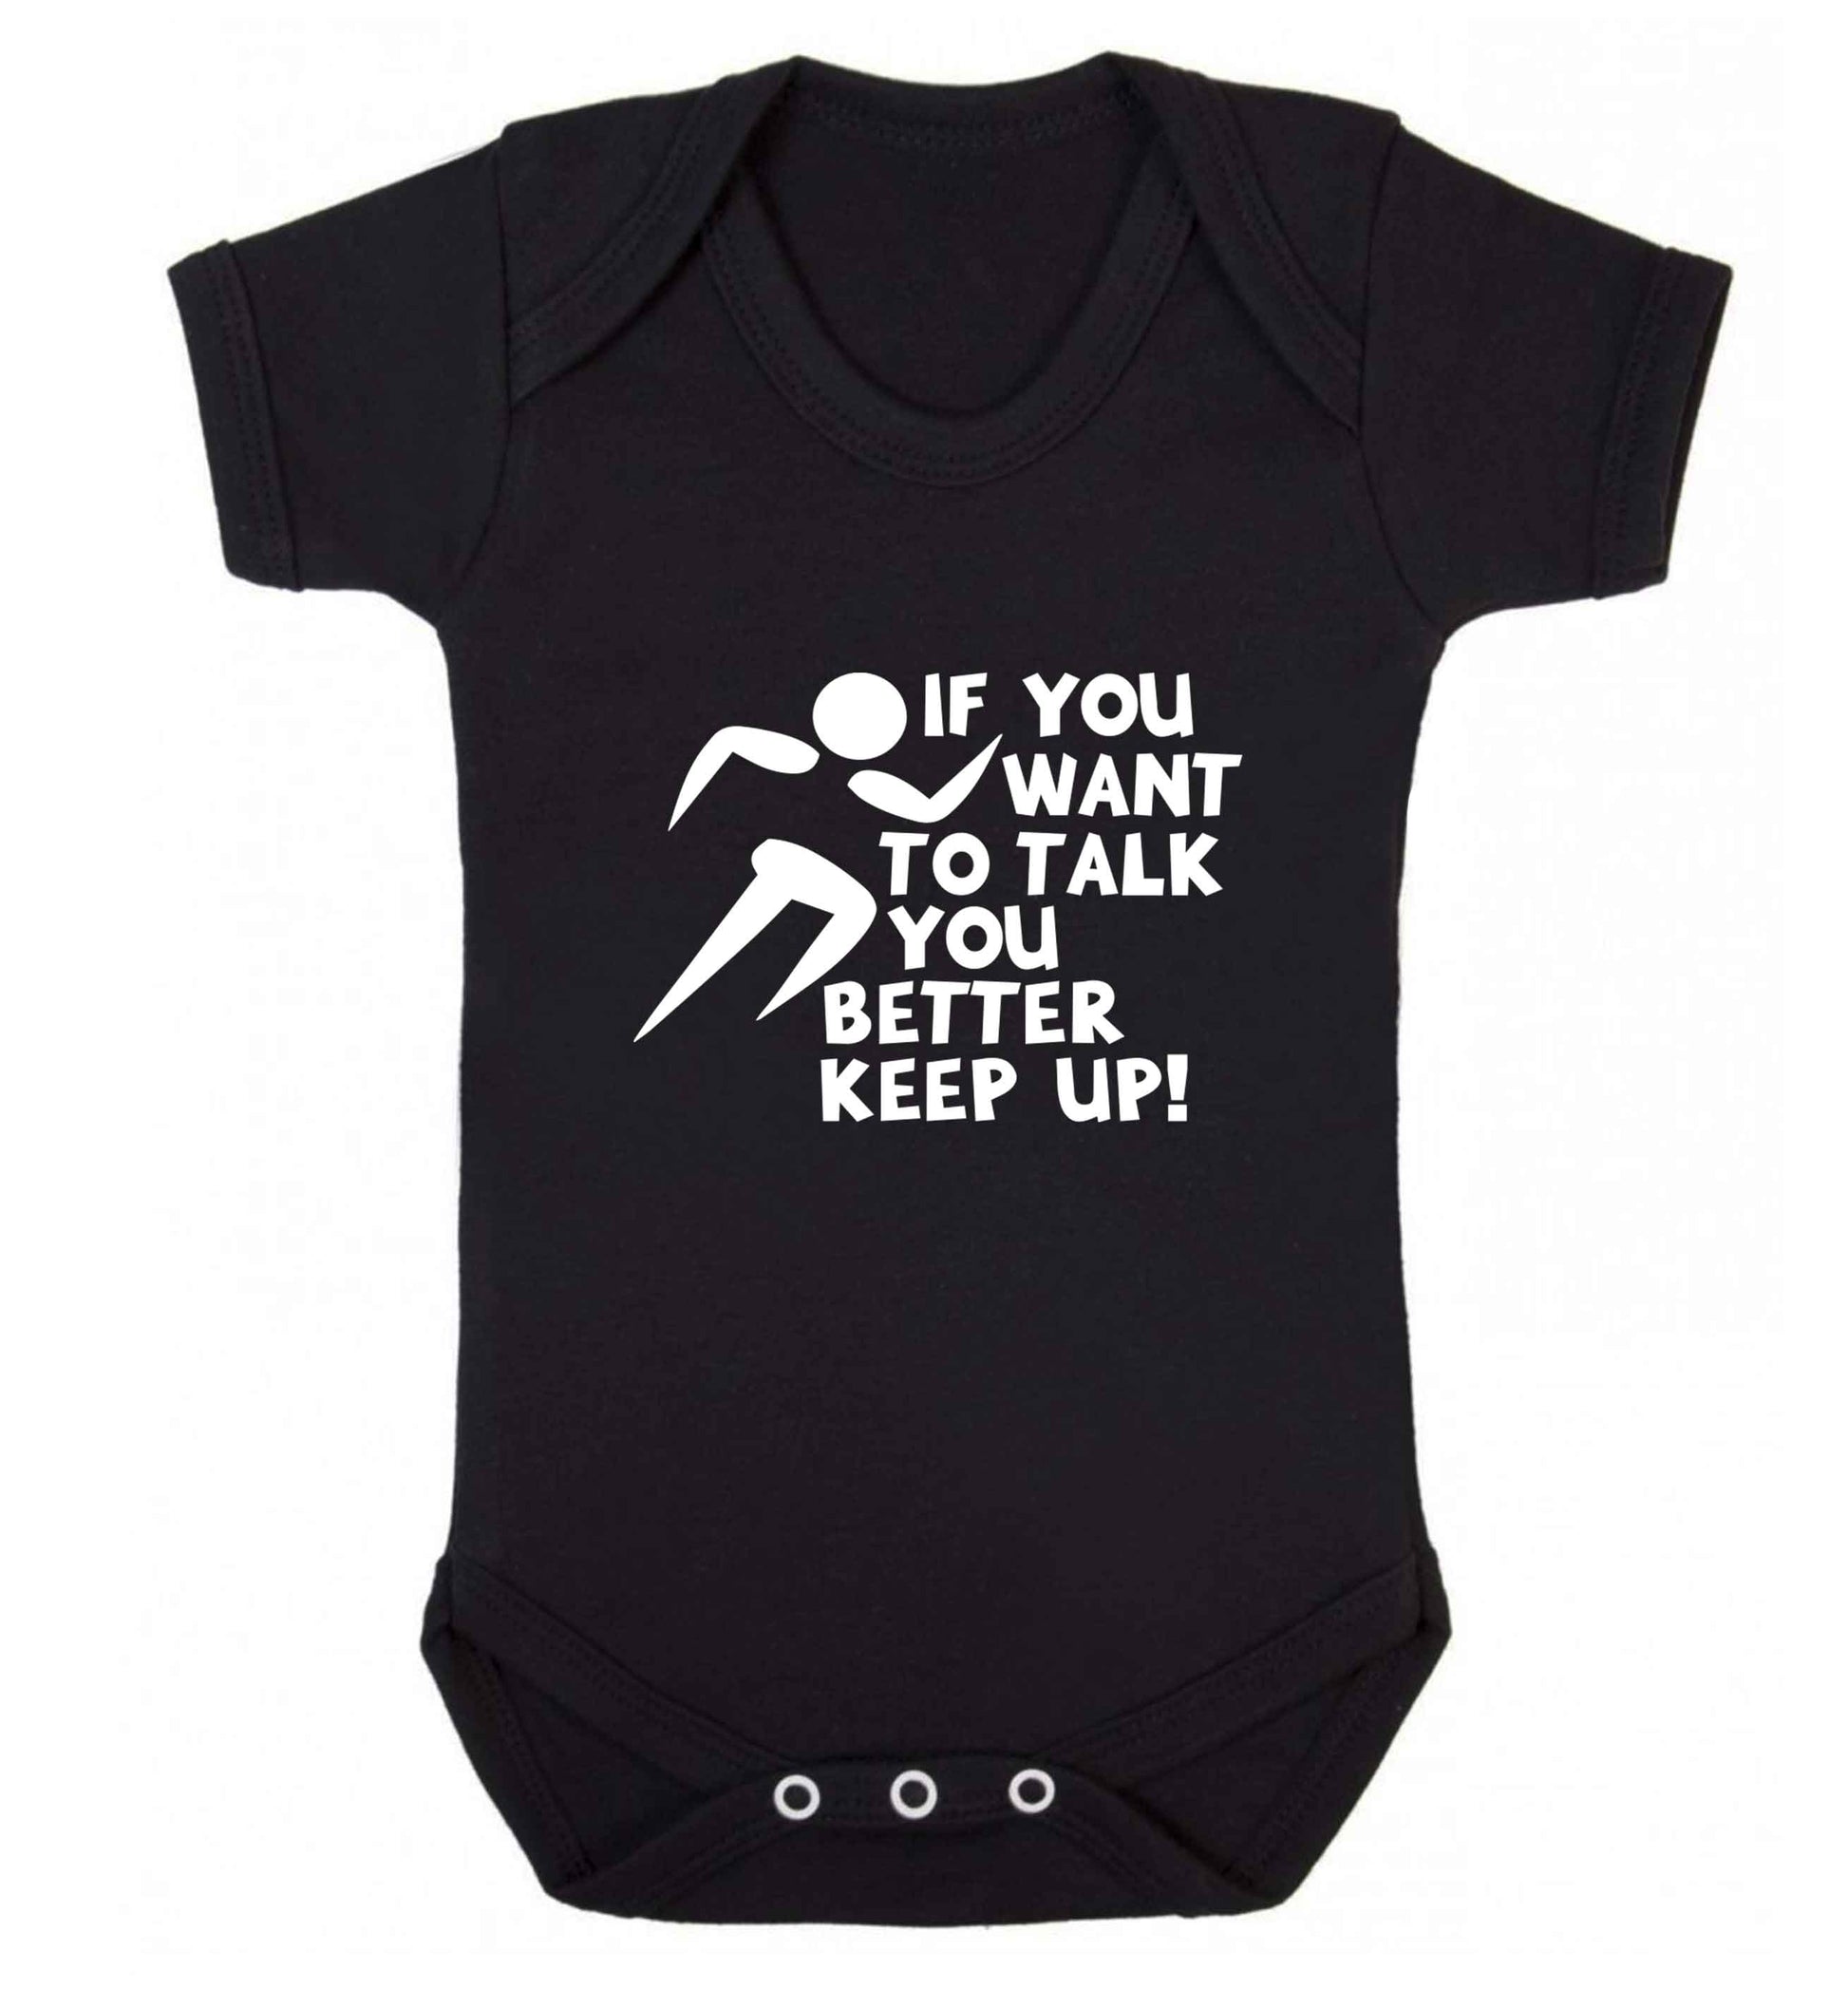 If you want to talk you better keep up! baby vest black 18-24 months